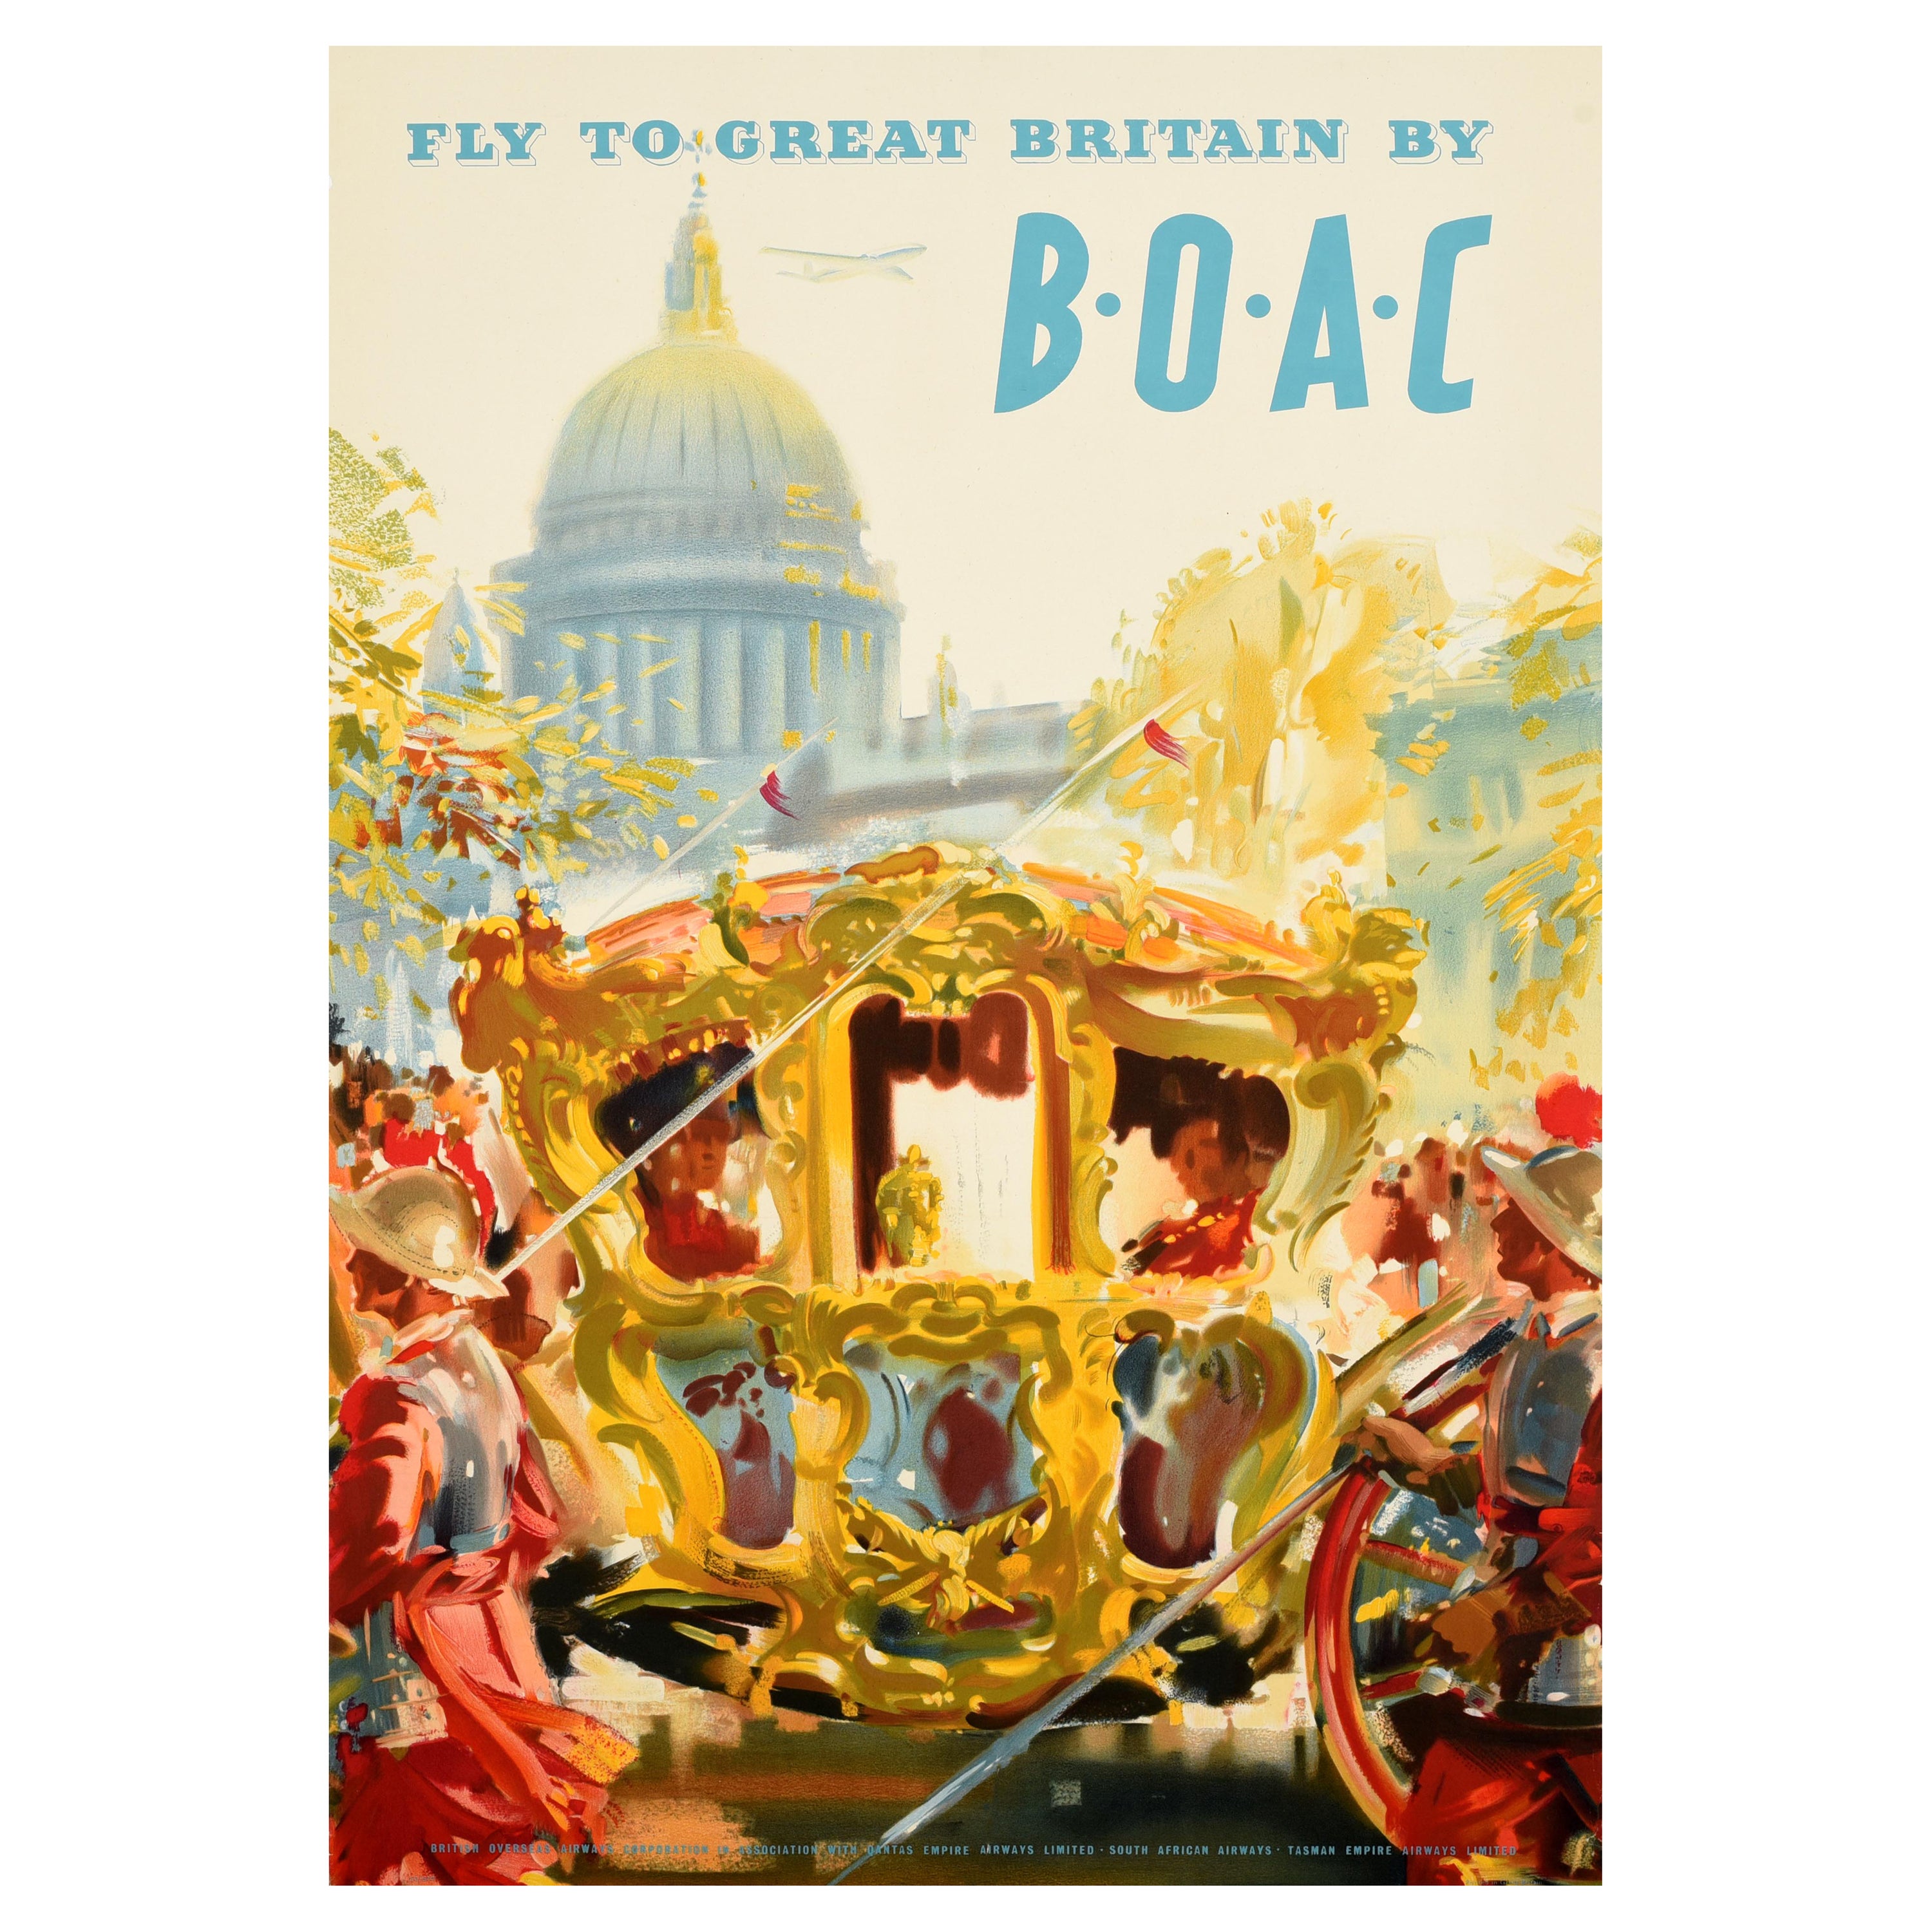 Original Vintage Poster Great Britain BOAC Lord Mayor's Show St Paul's Cathedral